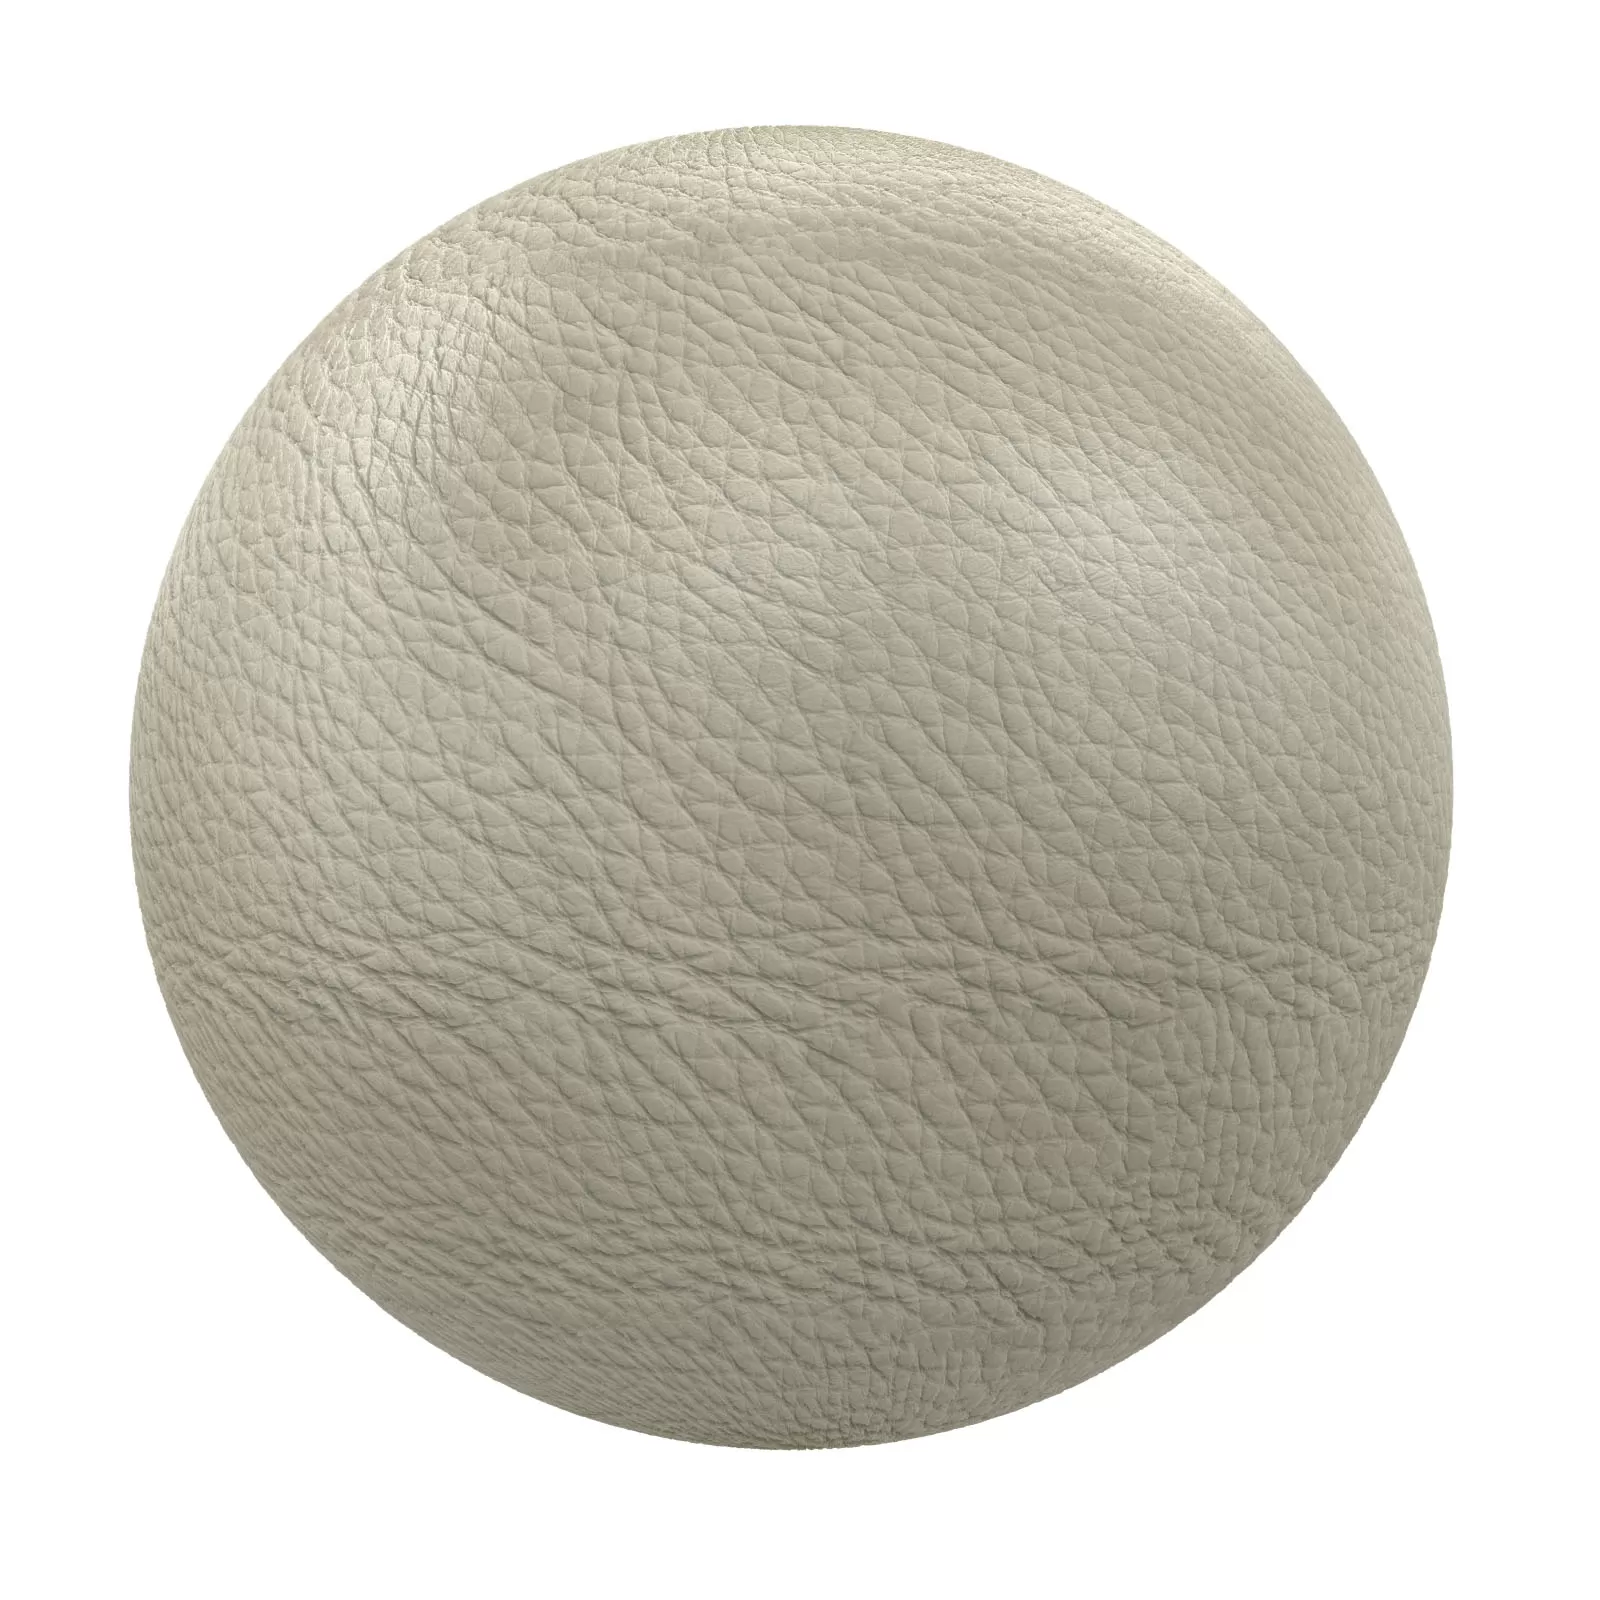 PBR CGAXIS TEXTURES – LEATHER – White Leather 1